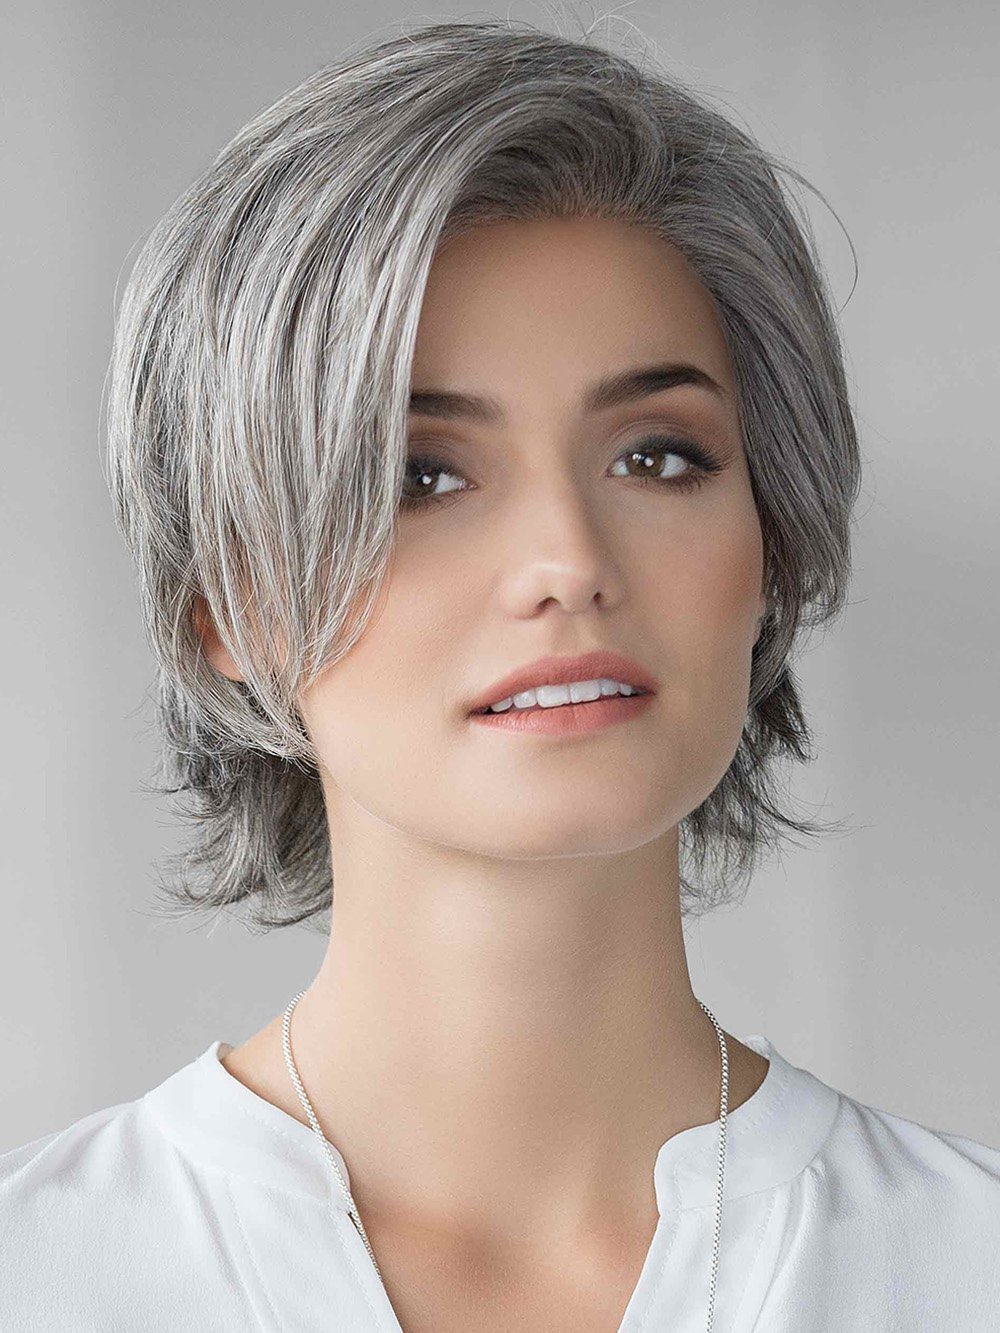 Soft and slightly asymmetrical cut with unlimited styling versatility. The lightweight density and perfectly placed layers offer a look both natural and unique